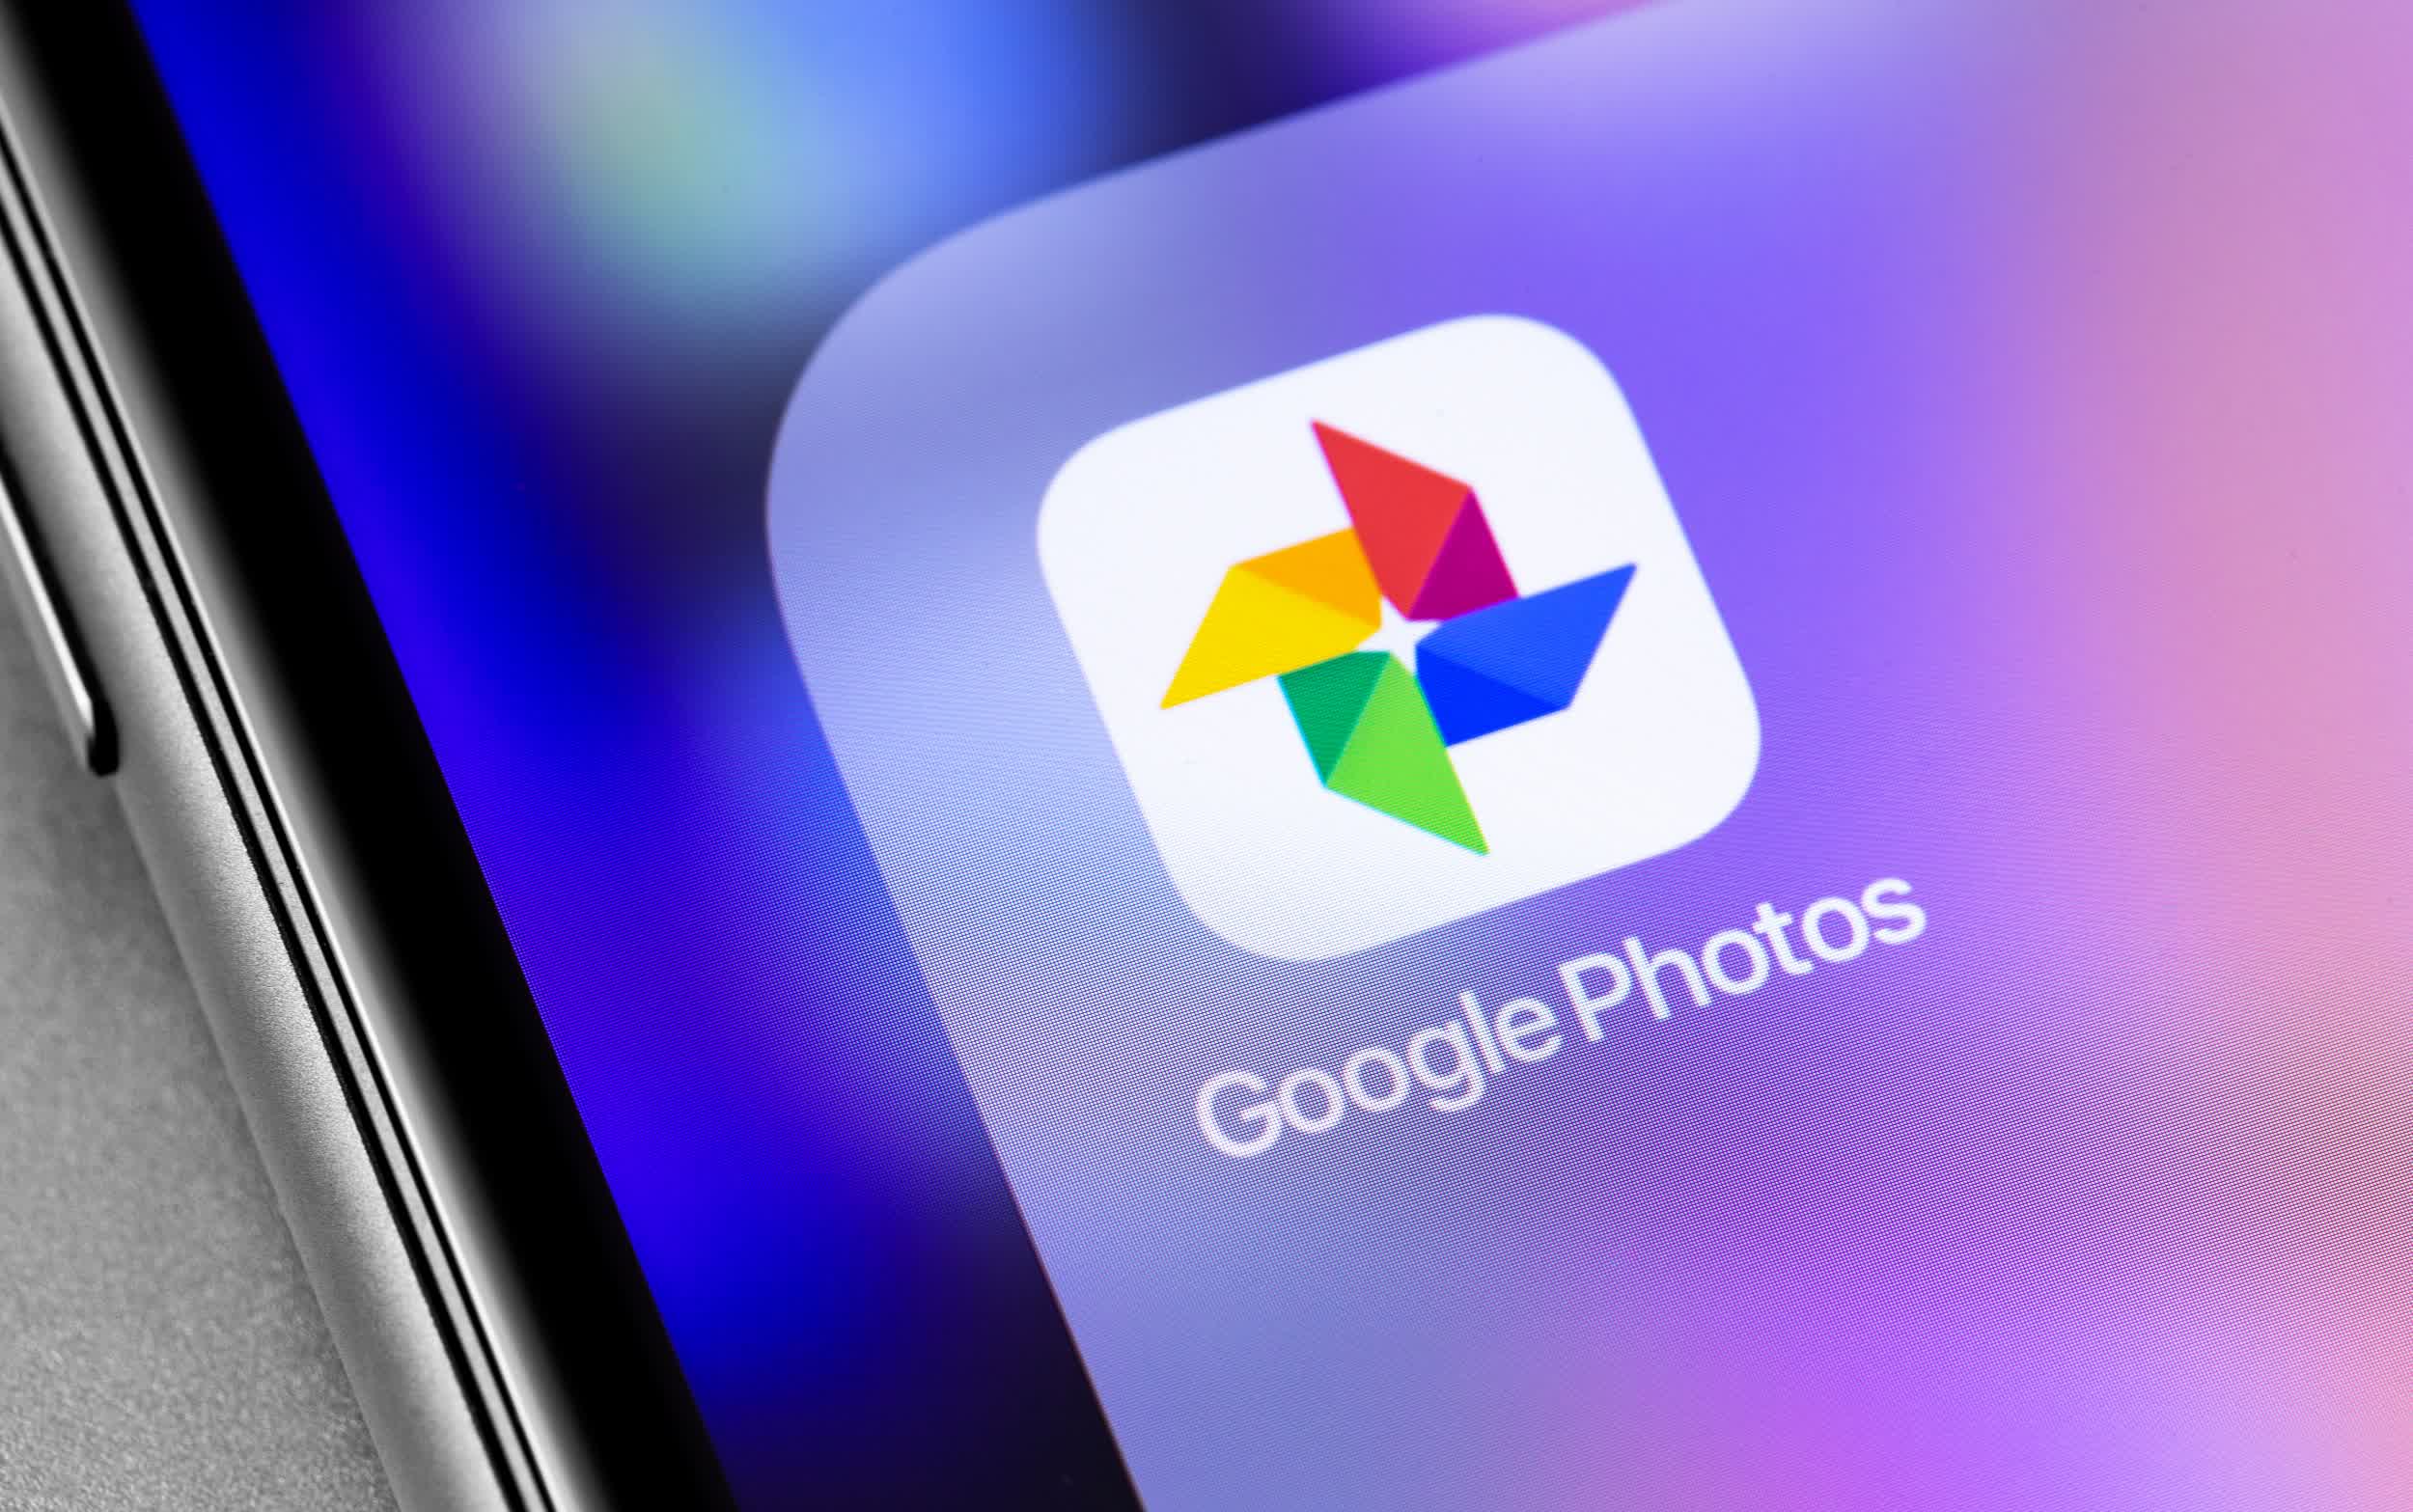 Google Photos is ending free unlimited storage on June 2021